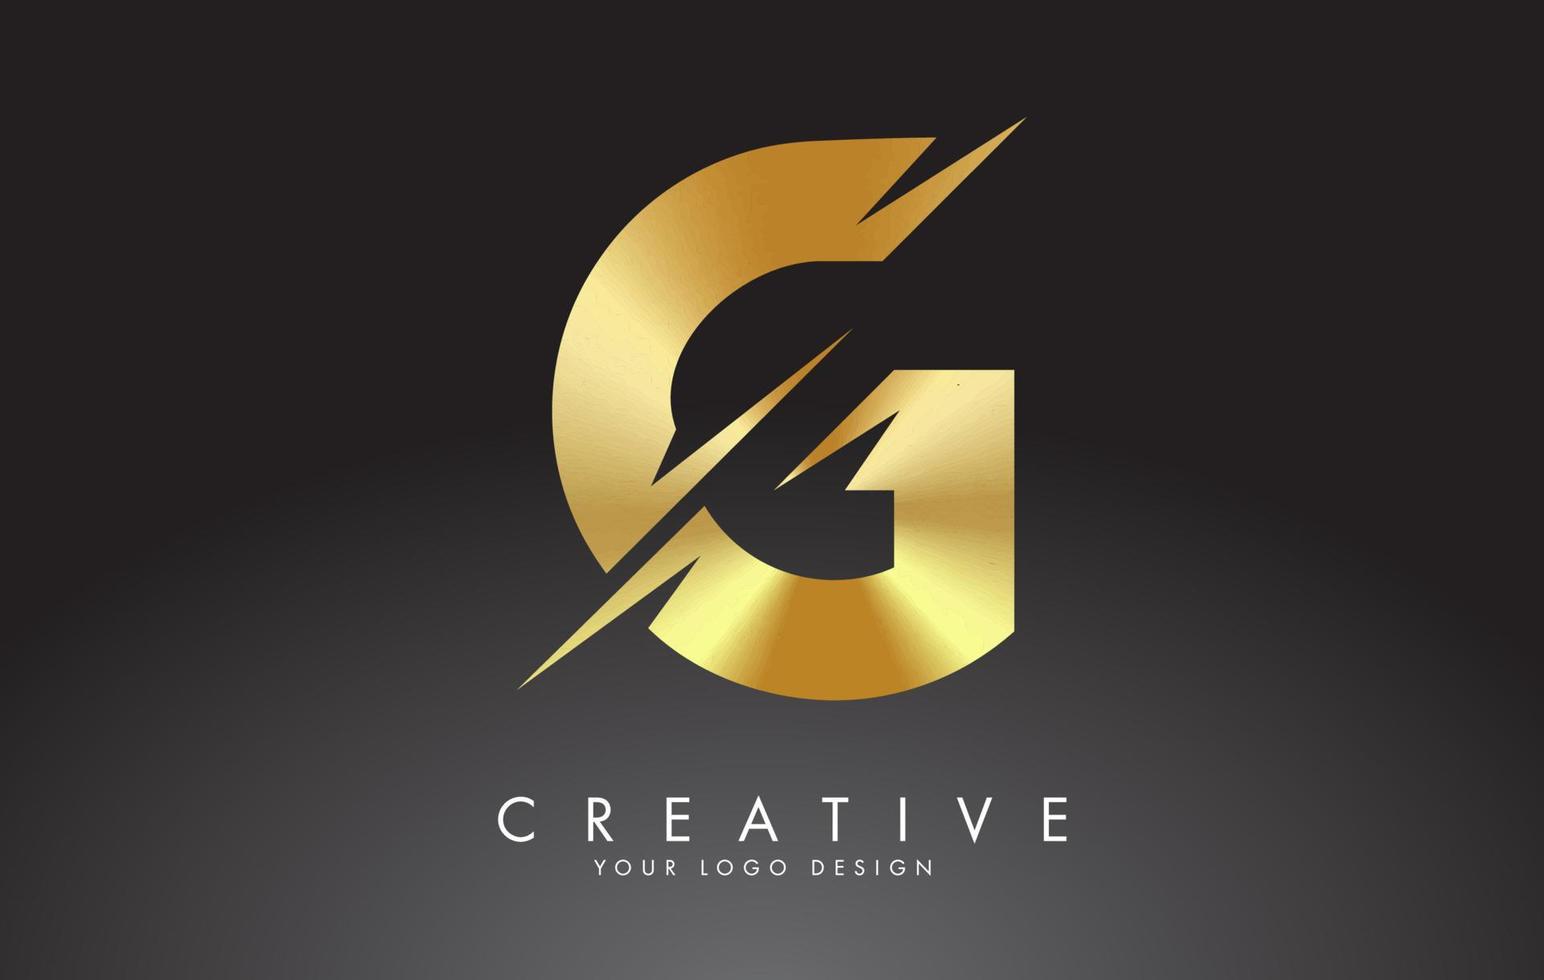 Golden G letter logo design with creative cuts. vector